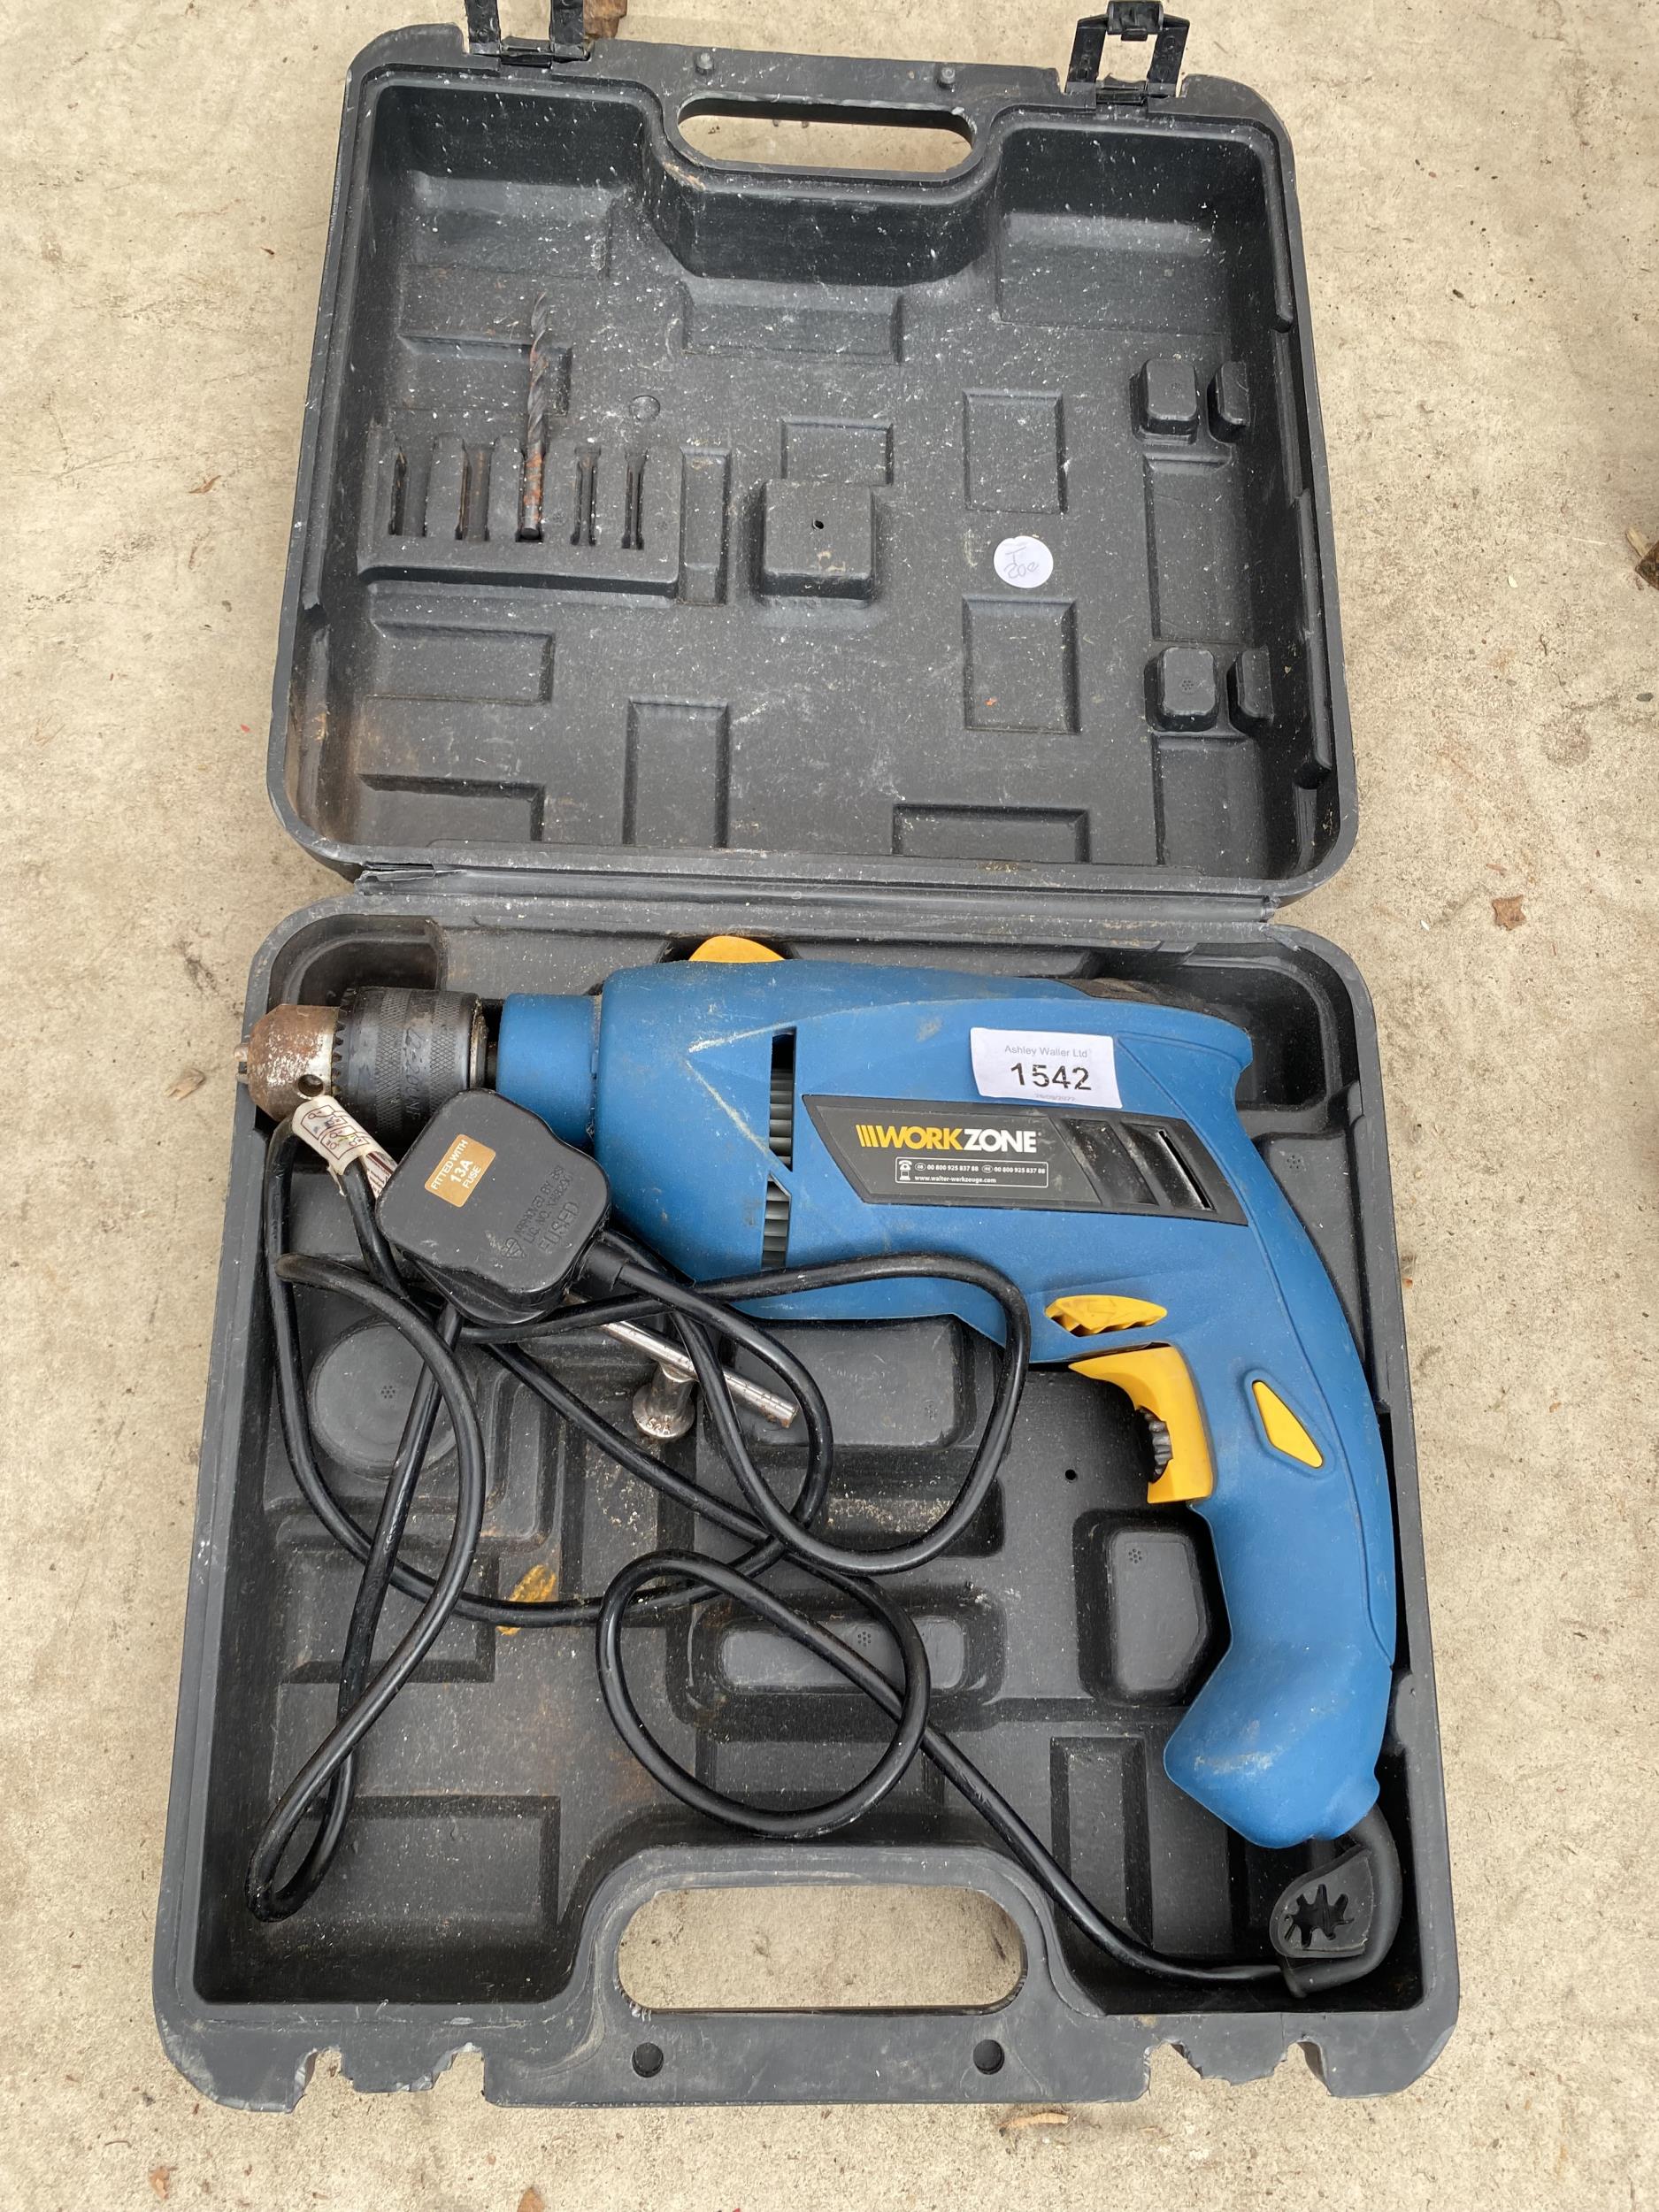 A WORKZONE ELECTRIC DRILL